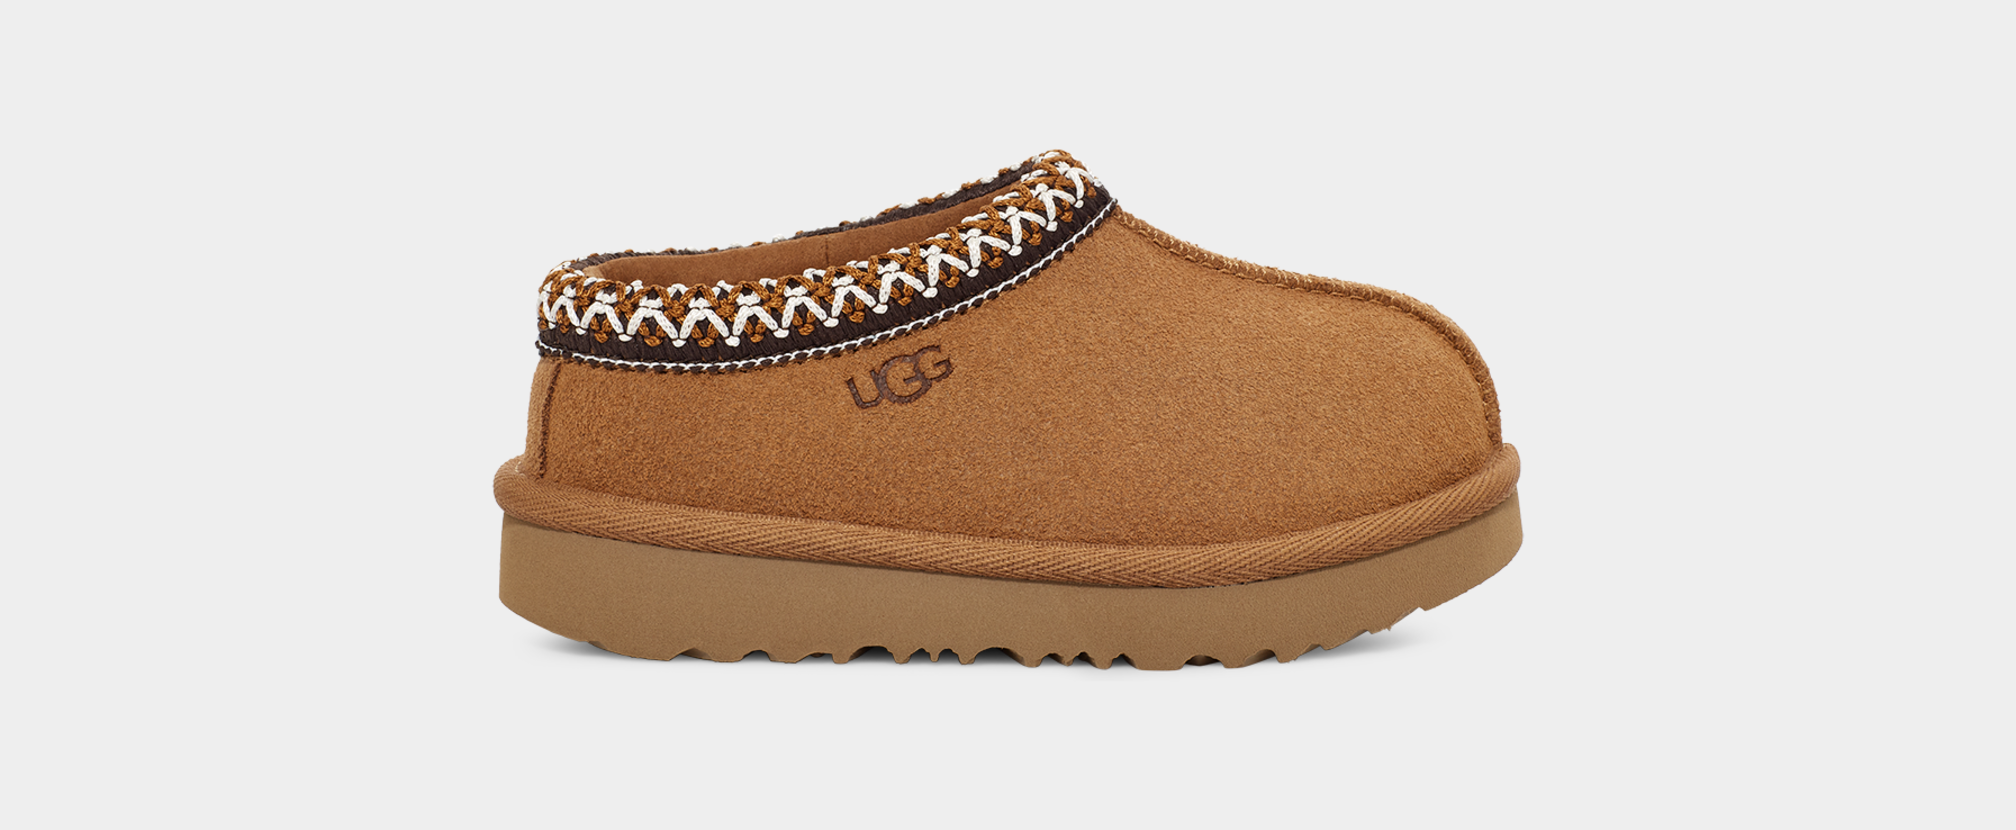 Details more than 253 size 13 ugg slippers best